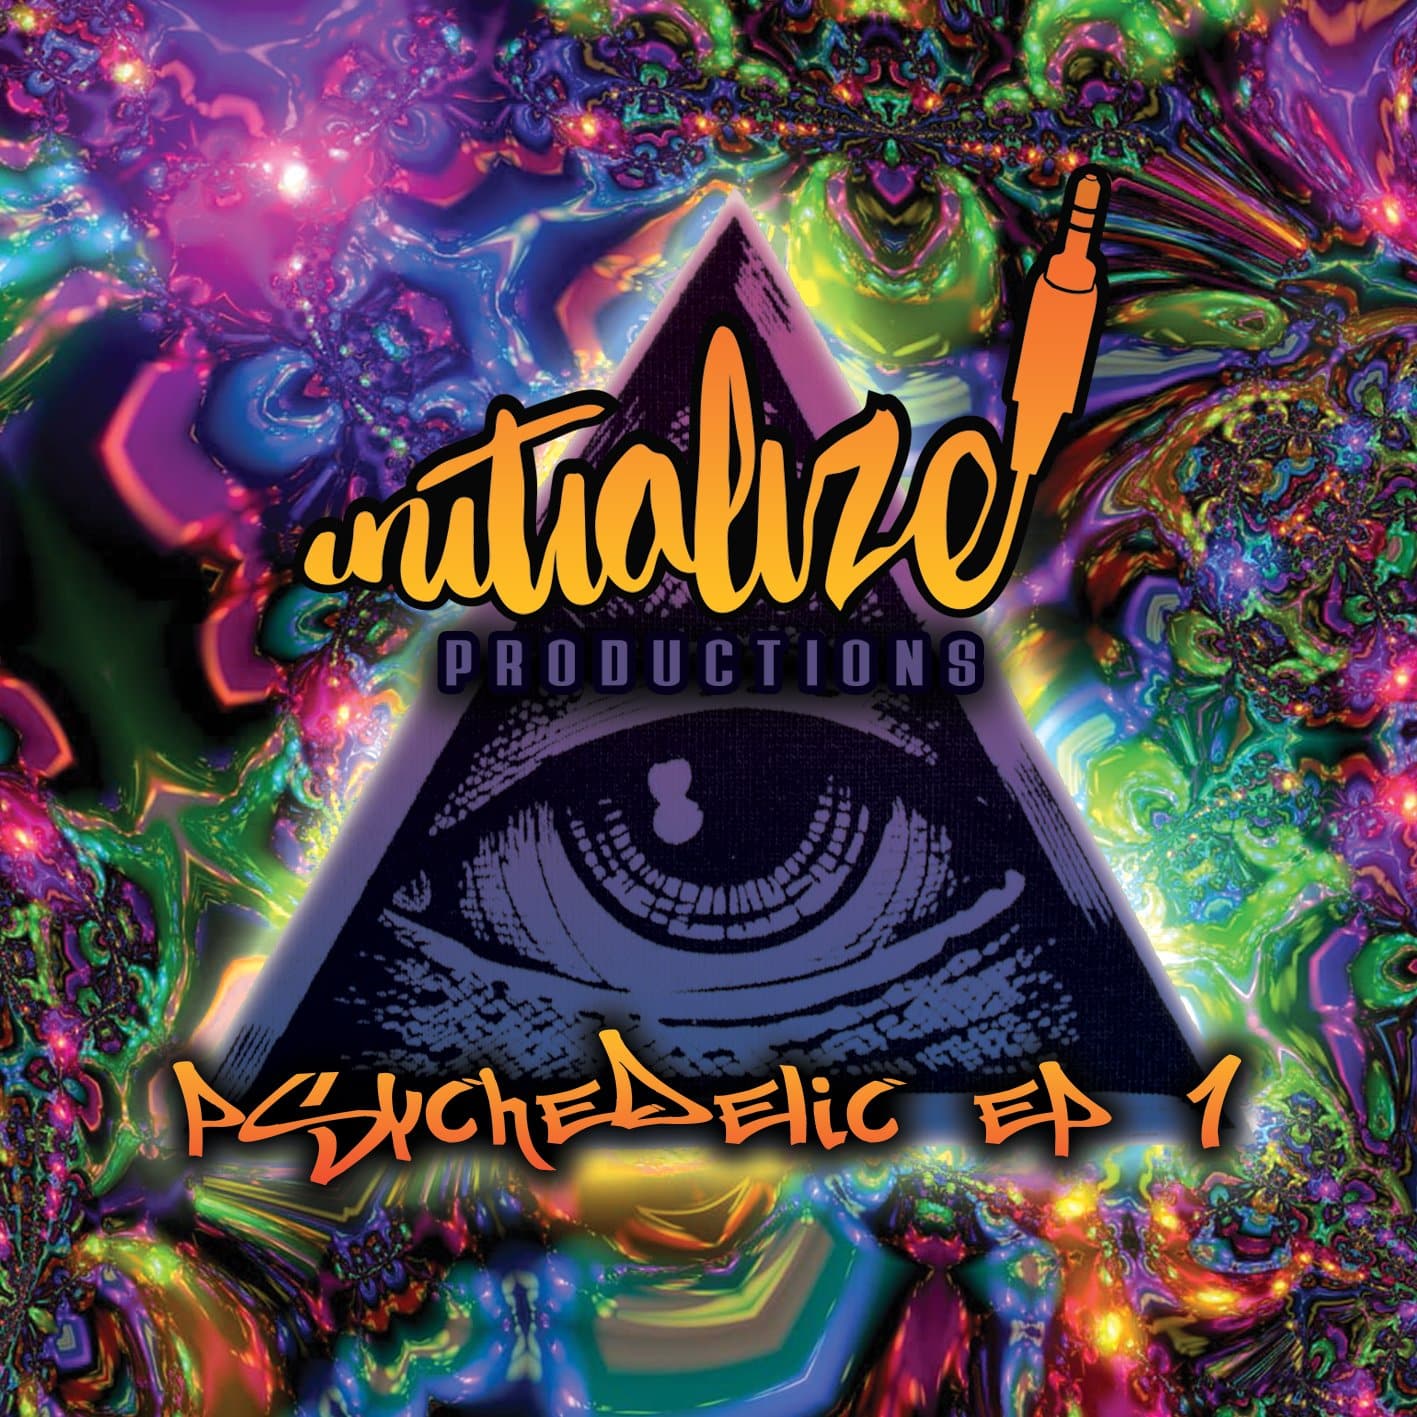 Initialize Productions - Psychedelic EP 1 (Album) - Rewired Records